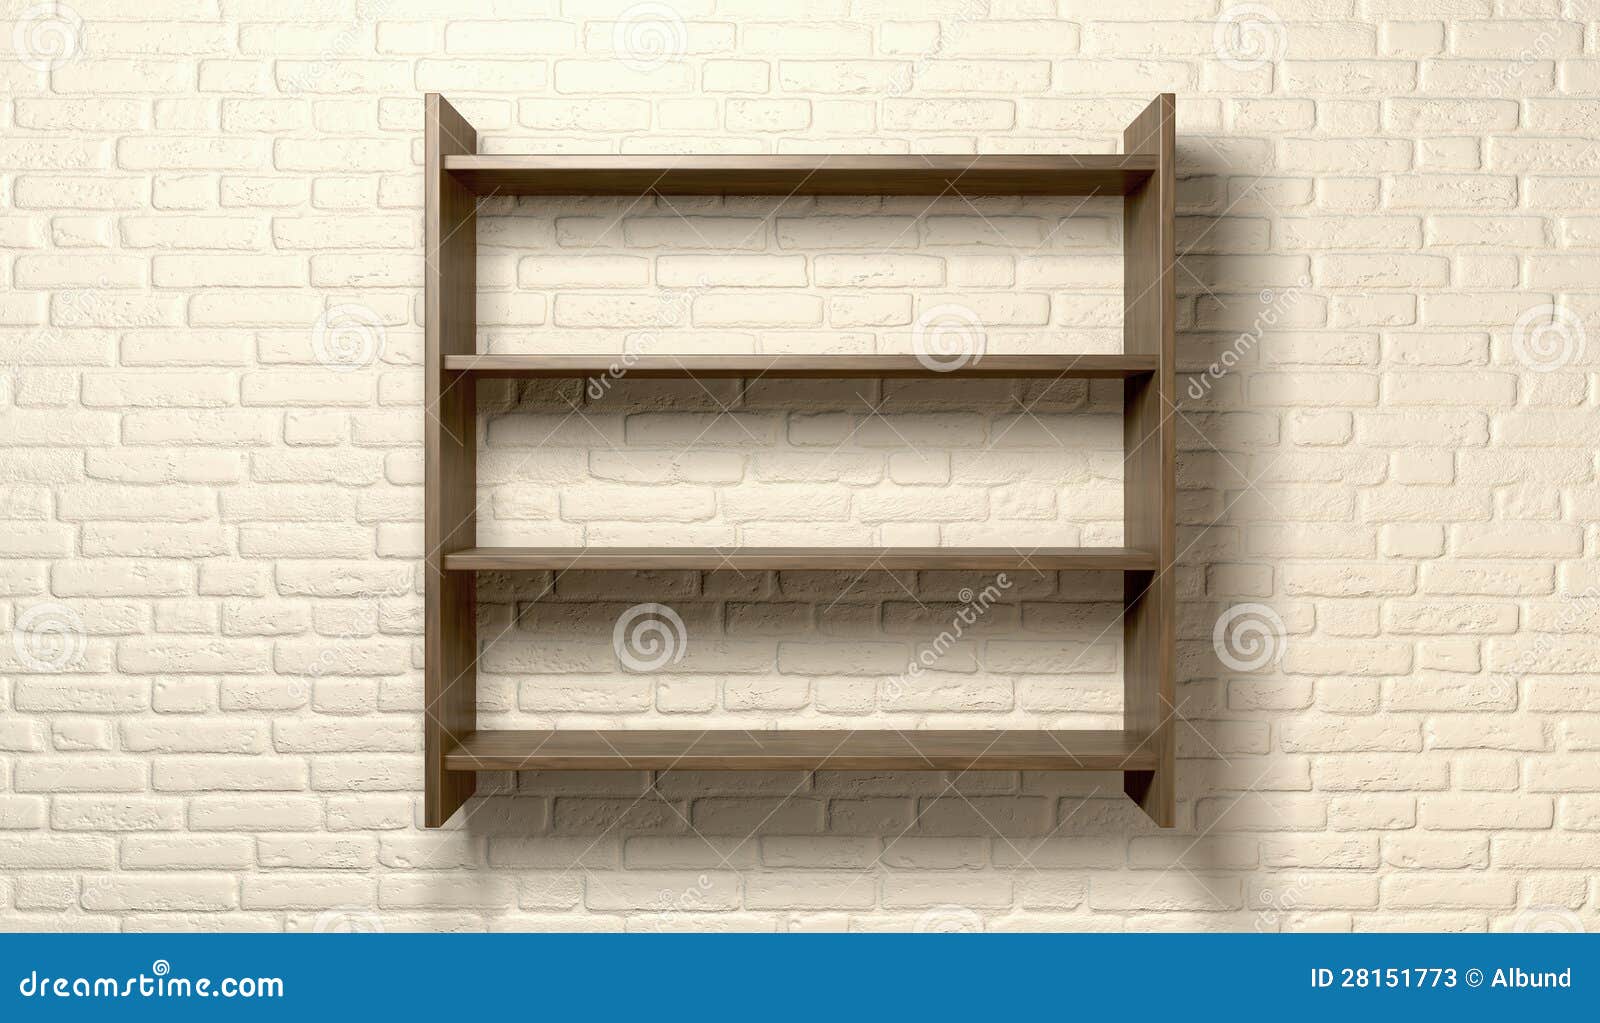 shelving unit on a wall front